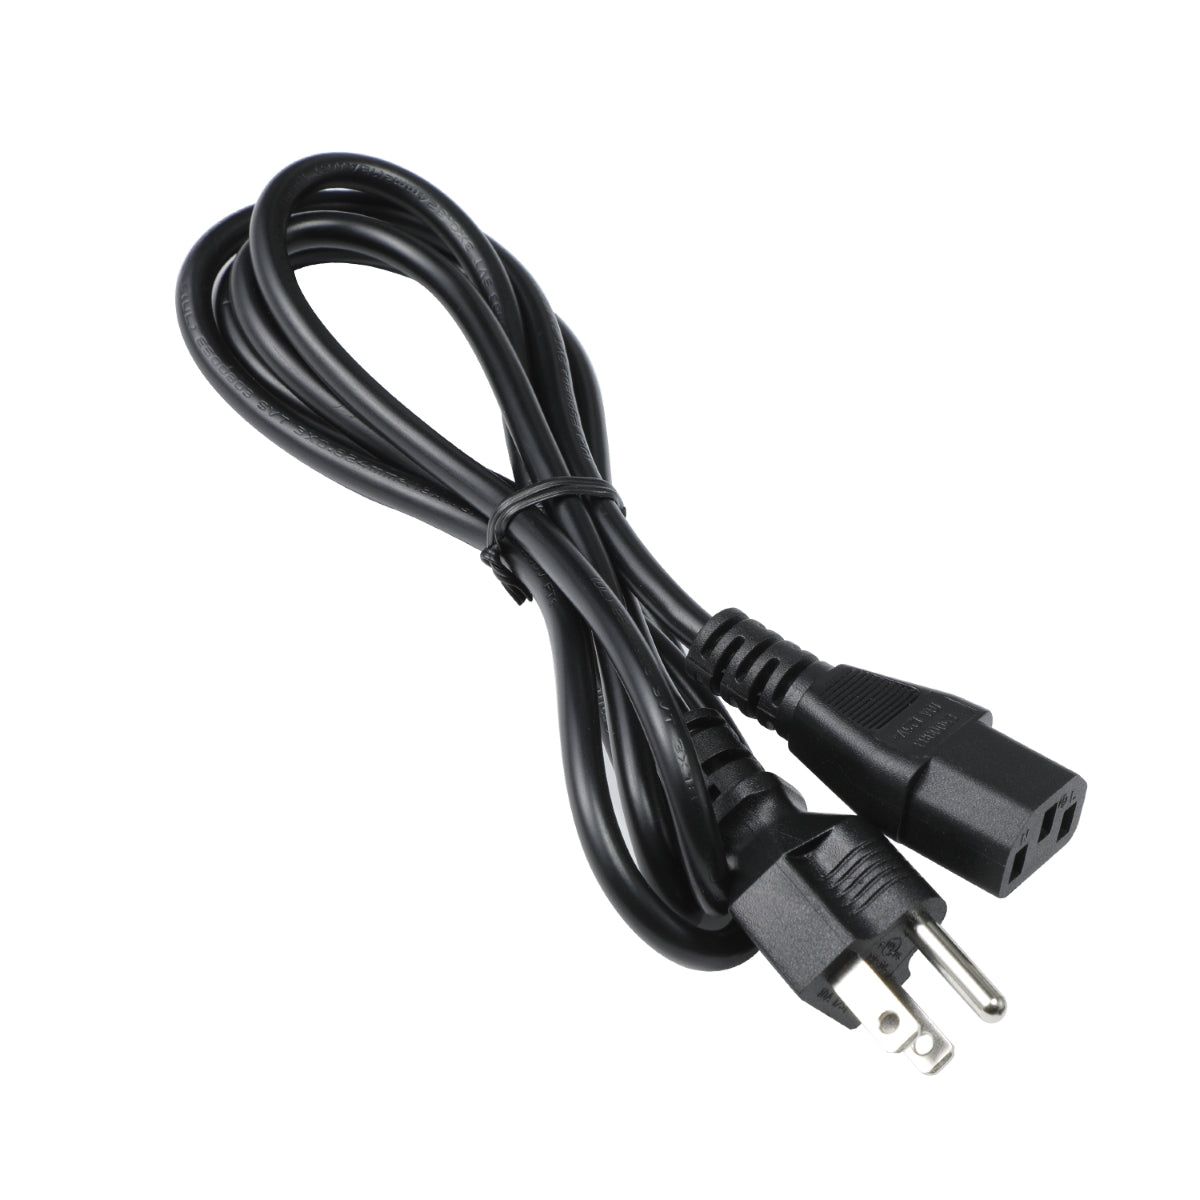 Power Cable for Philips 271B8QTAA Monitor.